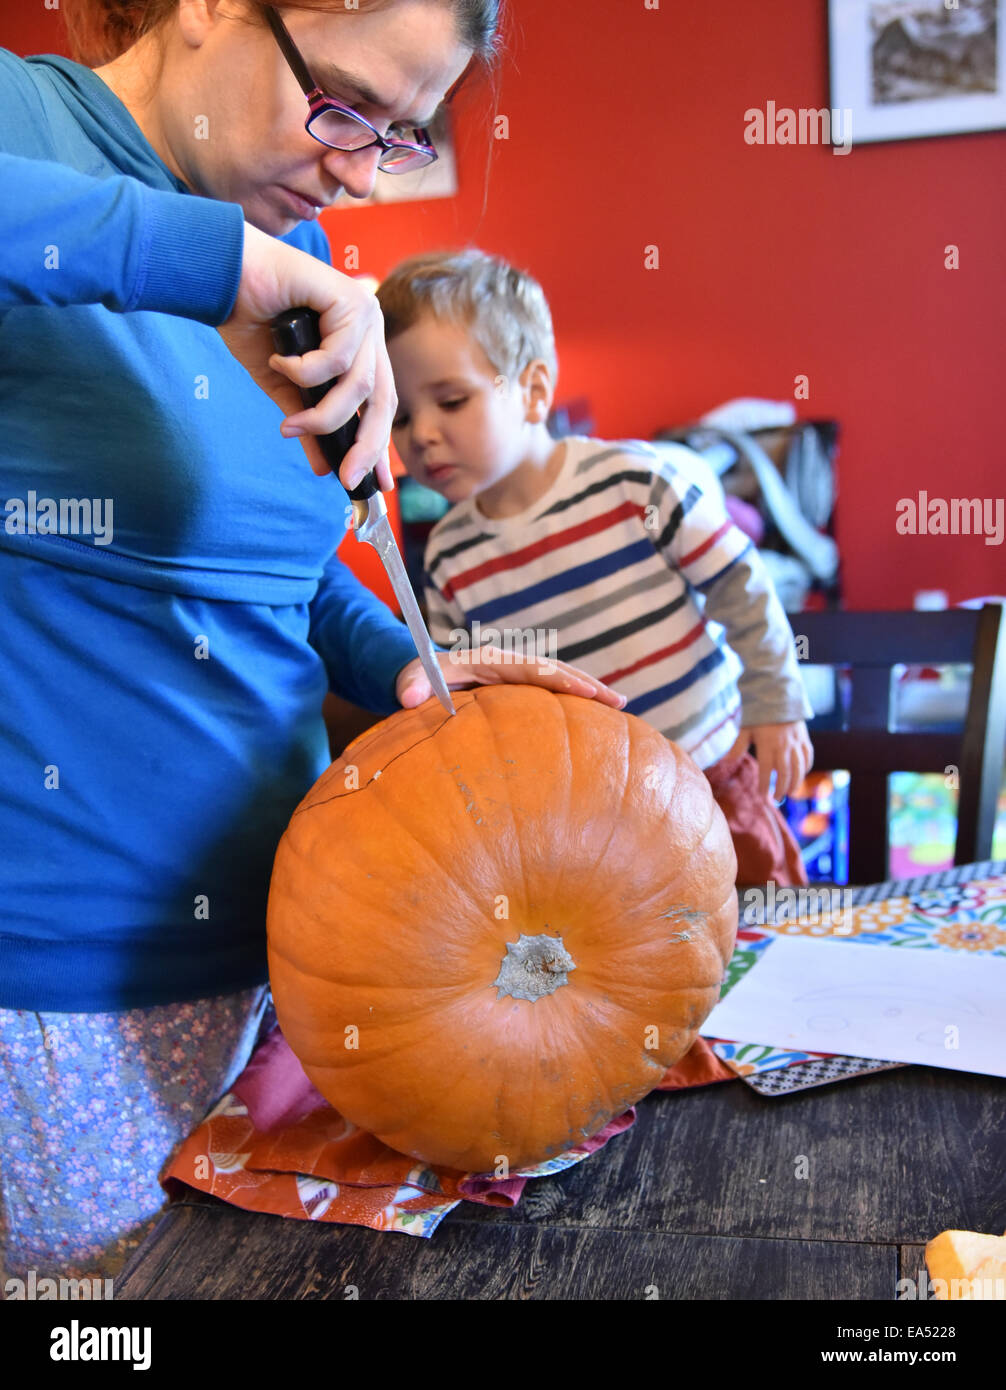 A mother carving a face in a pumpkin while her son watches Stock Photo